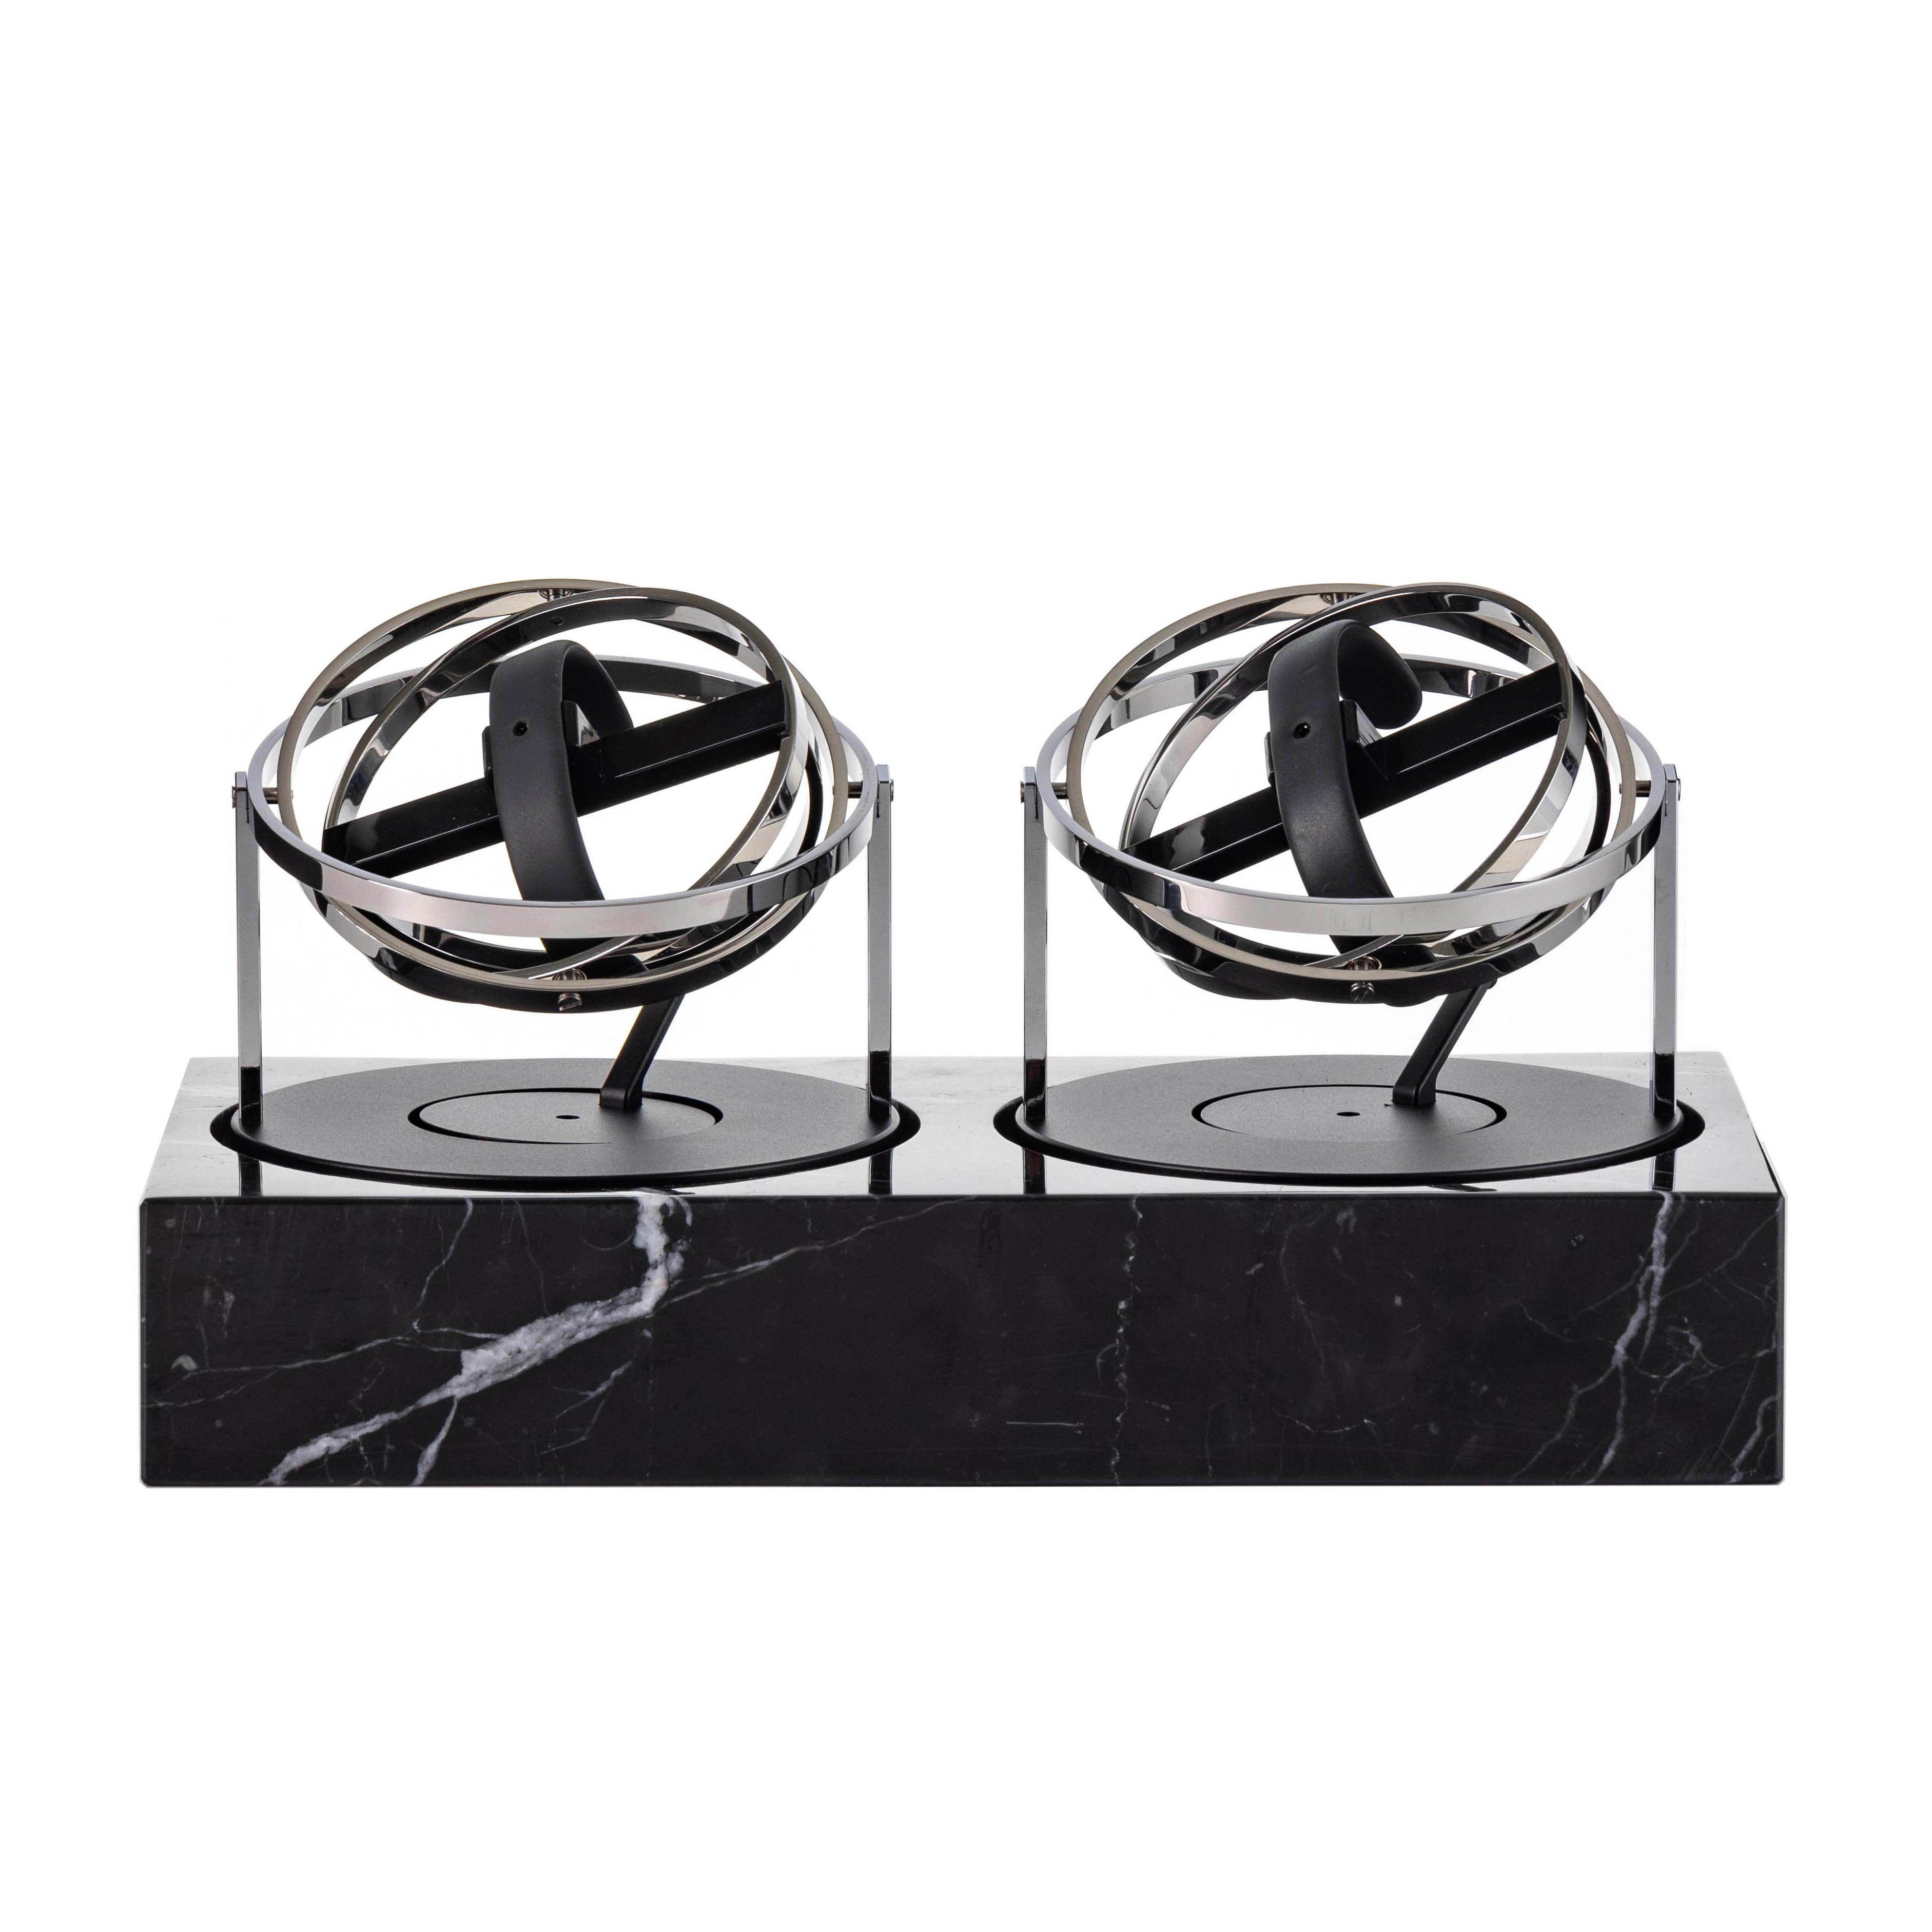 Double Watch Winder - Astronomia X1 Gold - Black Marble Edition